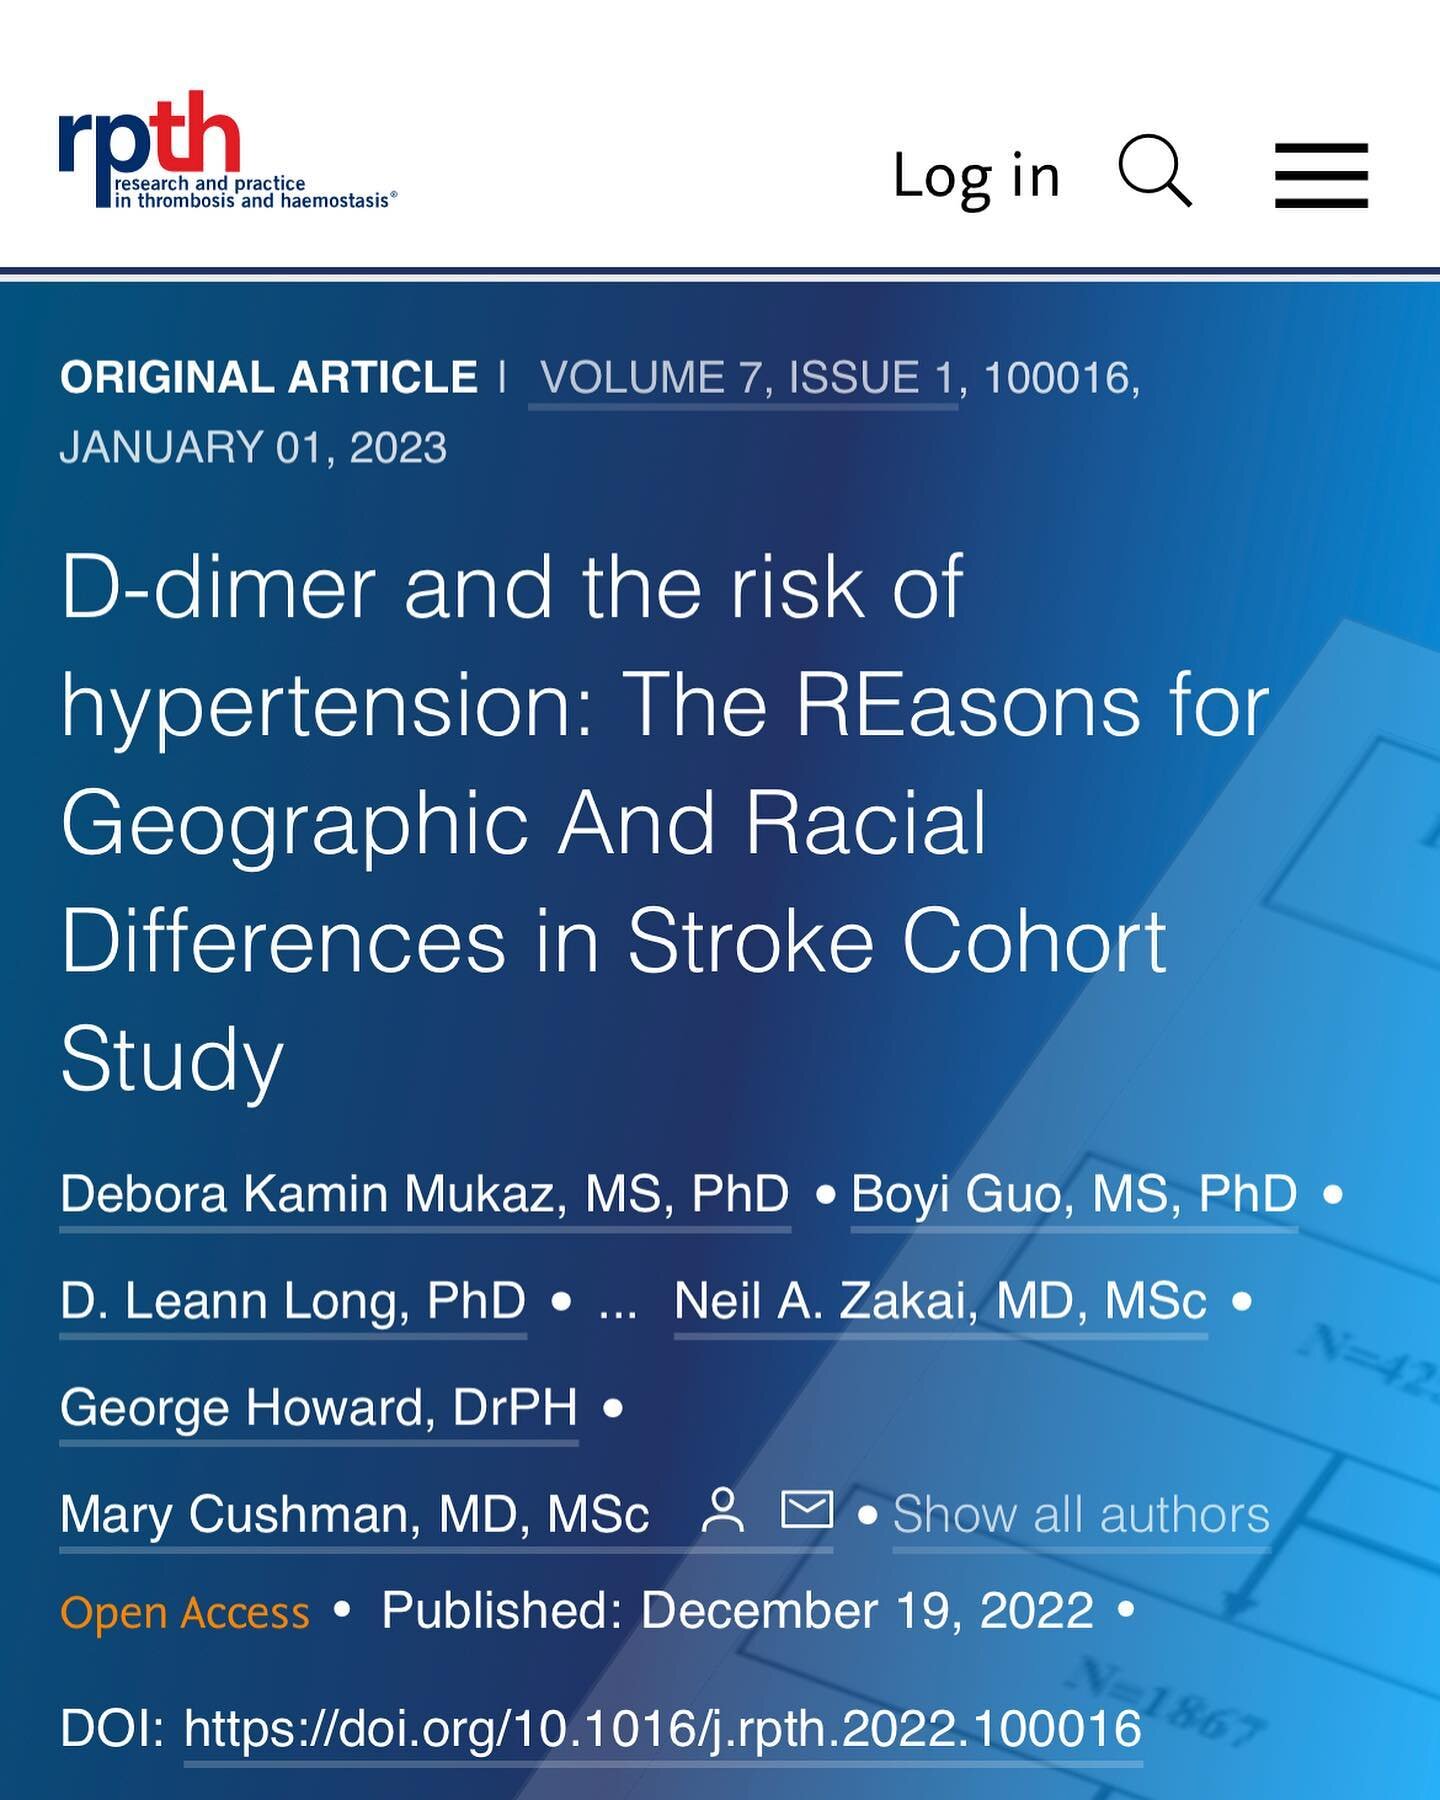 Happy to share my newest first-author research paper on D-dimer(a factor reflecting clotting and inflammation) and #hypertension in the REGARDS Study. The #REGARDSStudy is one of the largest and most diverse longitudinal studies on stroke and cogniti